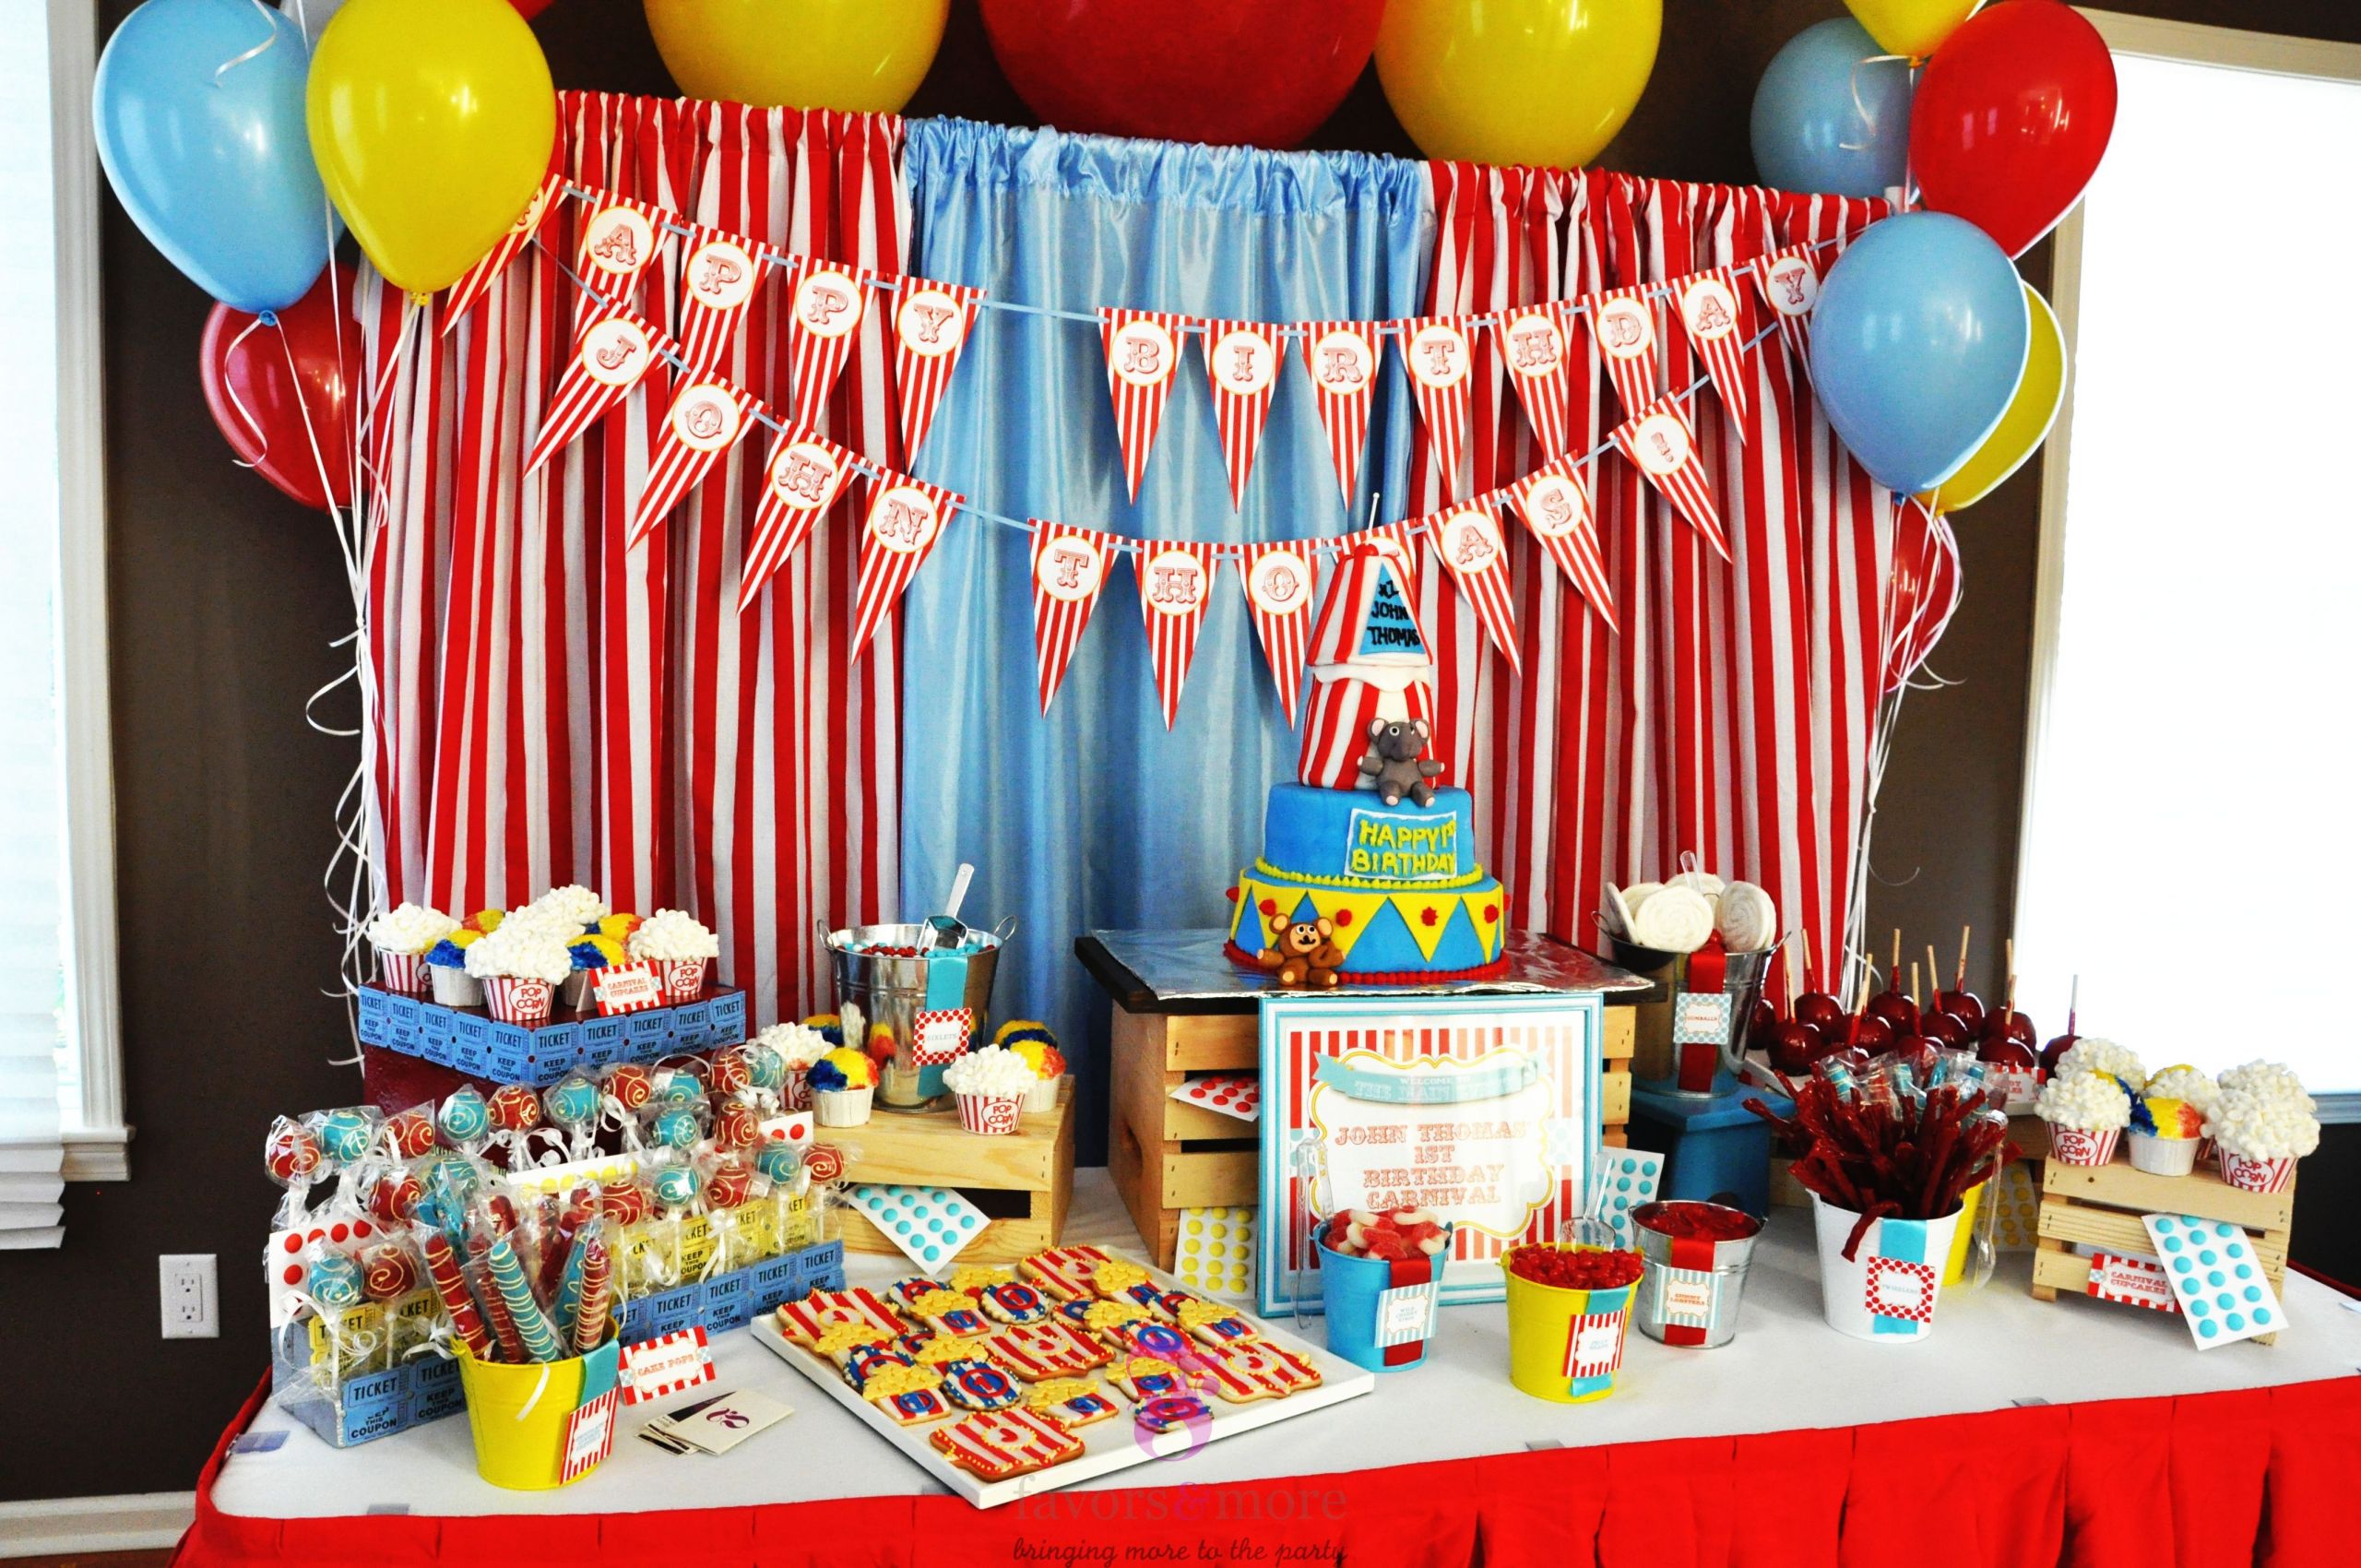 Carnival Birthday Party Decorations
 15 Best Carnival Birthday Party Ideas